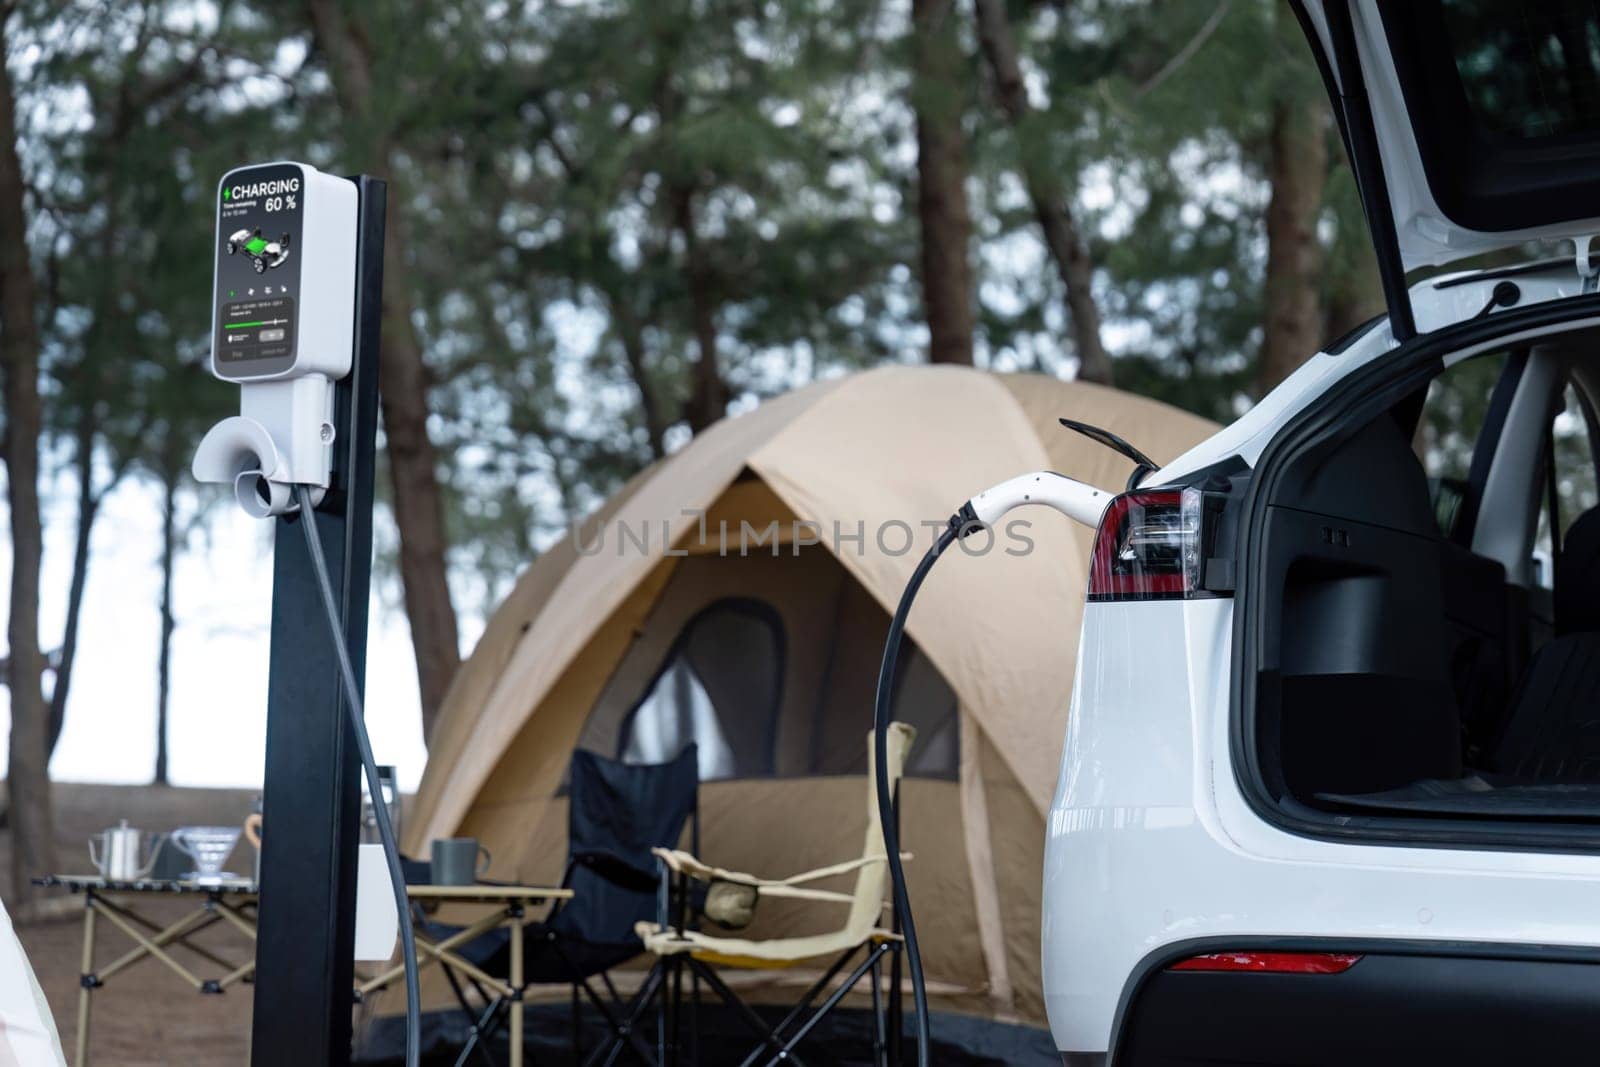 Electric car recharging battery at outdoor EV charging station at natural vacation campsite, alternative and sustainable energy technology eco-friendly car with holiday and travel concept. Perpetual